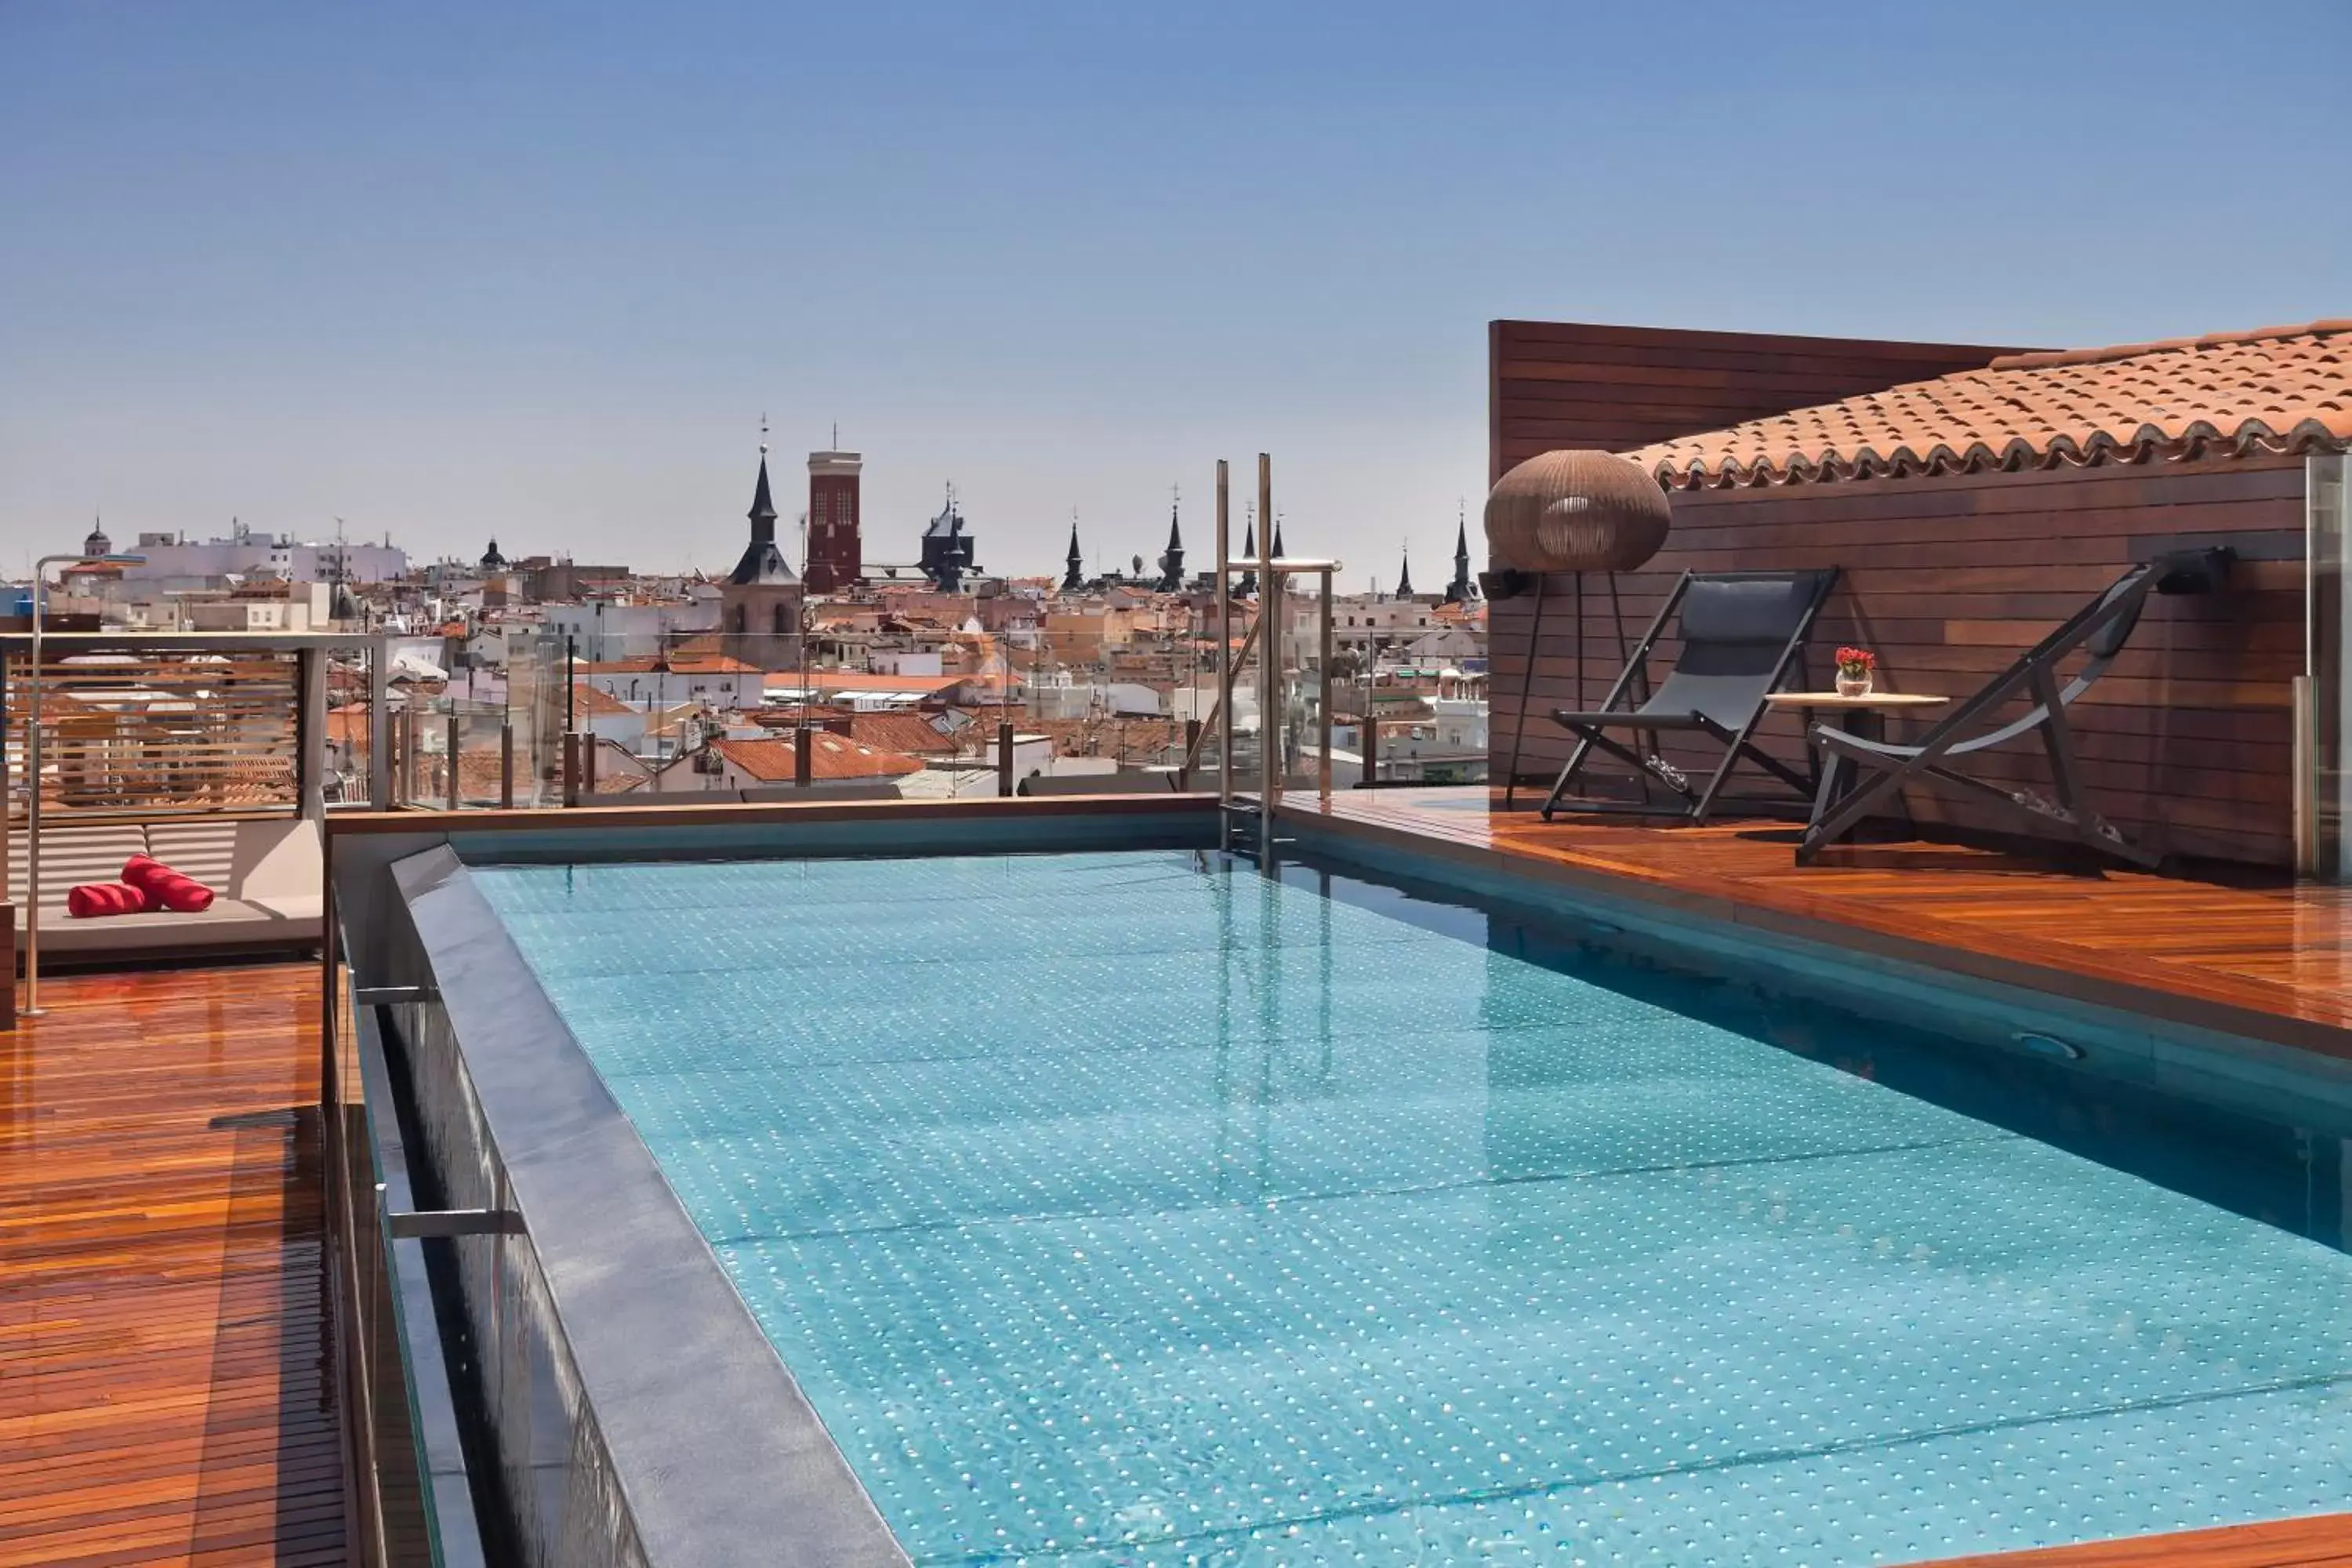 Balcony/Terrace, Swimming Pool in Palacio de los Duques Gran Meliá - The Leading Hotels of the World